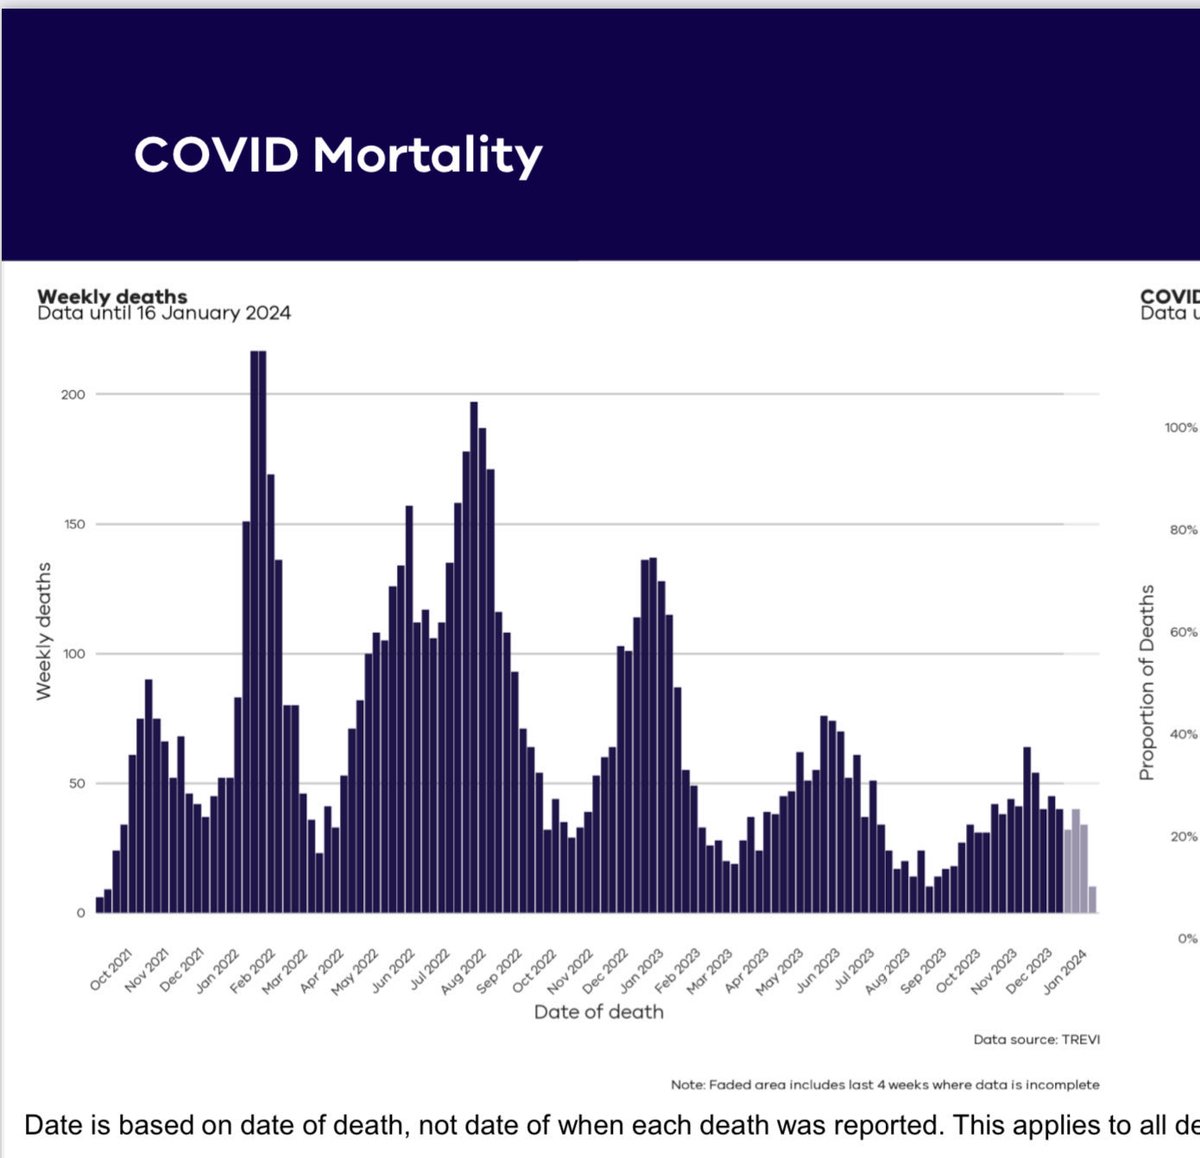 Many people still think that children and schools are the major factor in the spread of Covid. This is from Victoria Health, showing deaths (and the effect of Covid waves there). What you can’t see is any obvious relationship to children returning to school after holiday breaks.